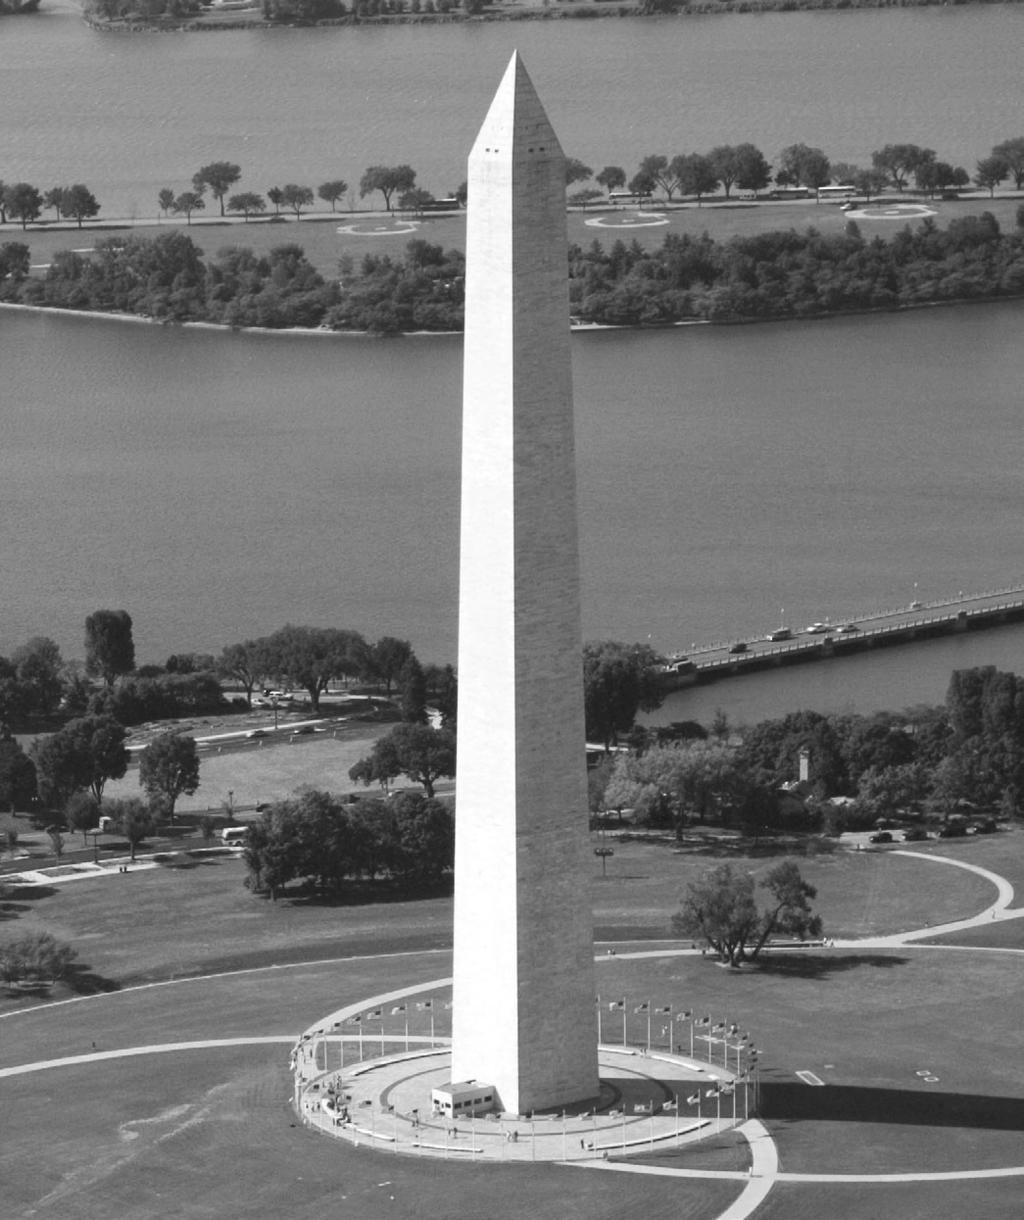 1 Lincoln urmoments/123rf Stock Photo 2 Washington Monument Abraham Lincoln was our 16th president. He served from 1861 until his assassination in 1865.